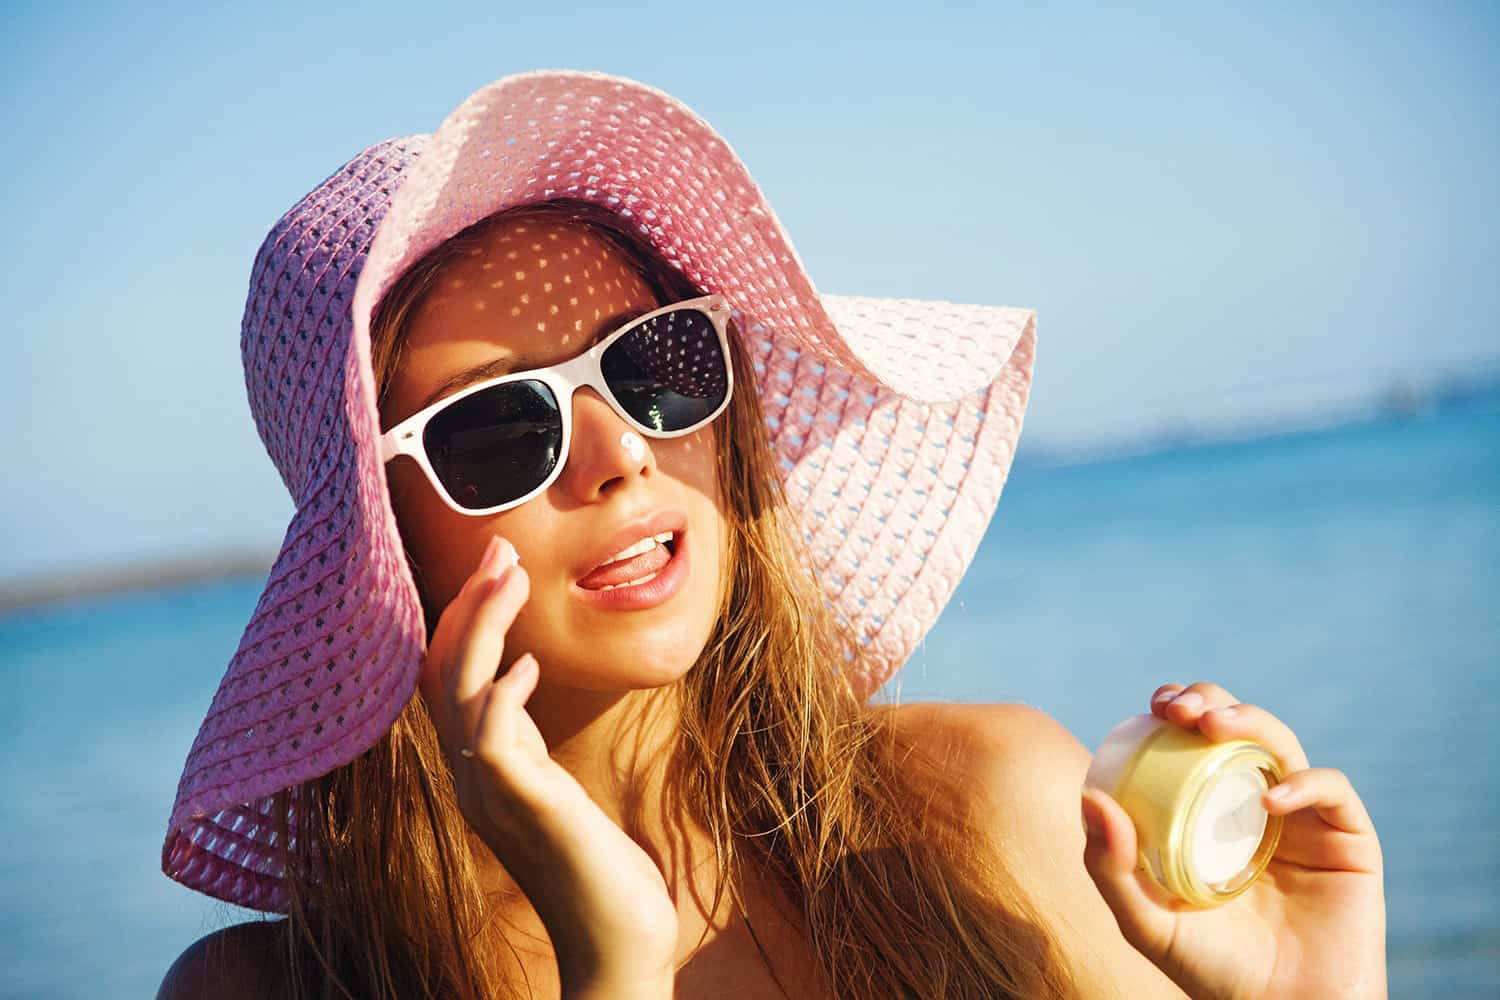 Beach hat for ladies beach outfit ideas sunglasses fashion trends sunscreen skin care